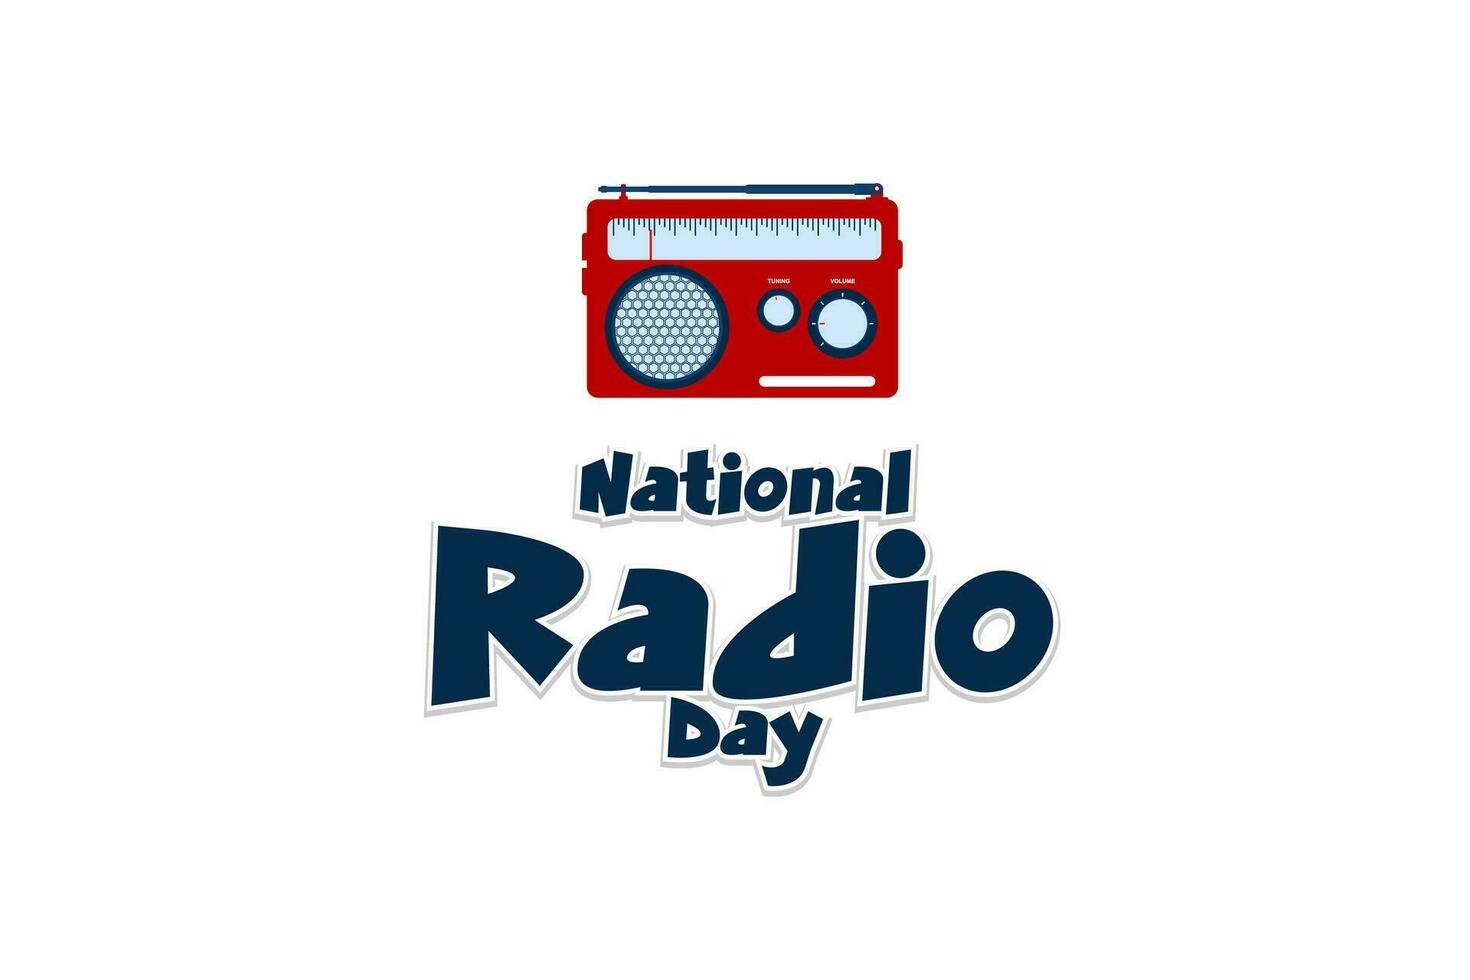 national Radio Day Holiday concept. Template for background, banner, card, poster, t-shirt with text inscription vector